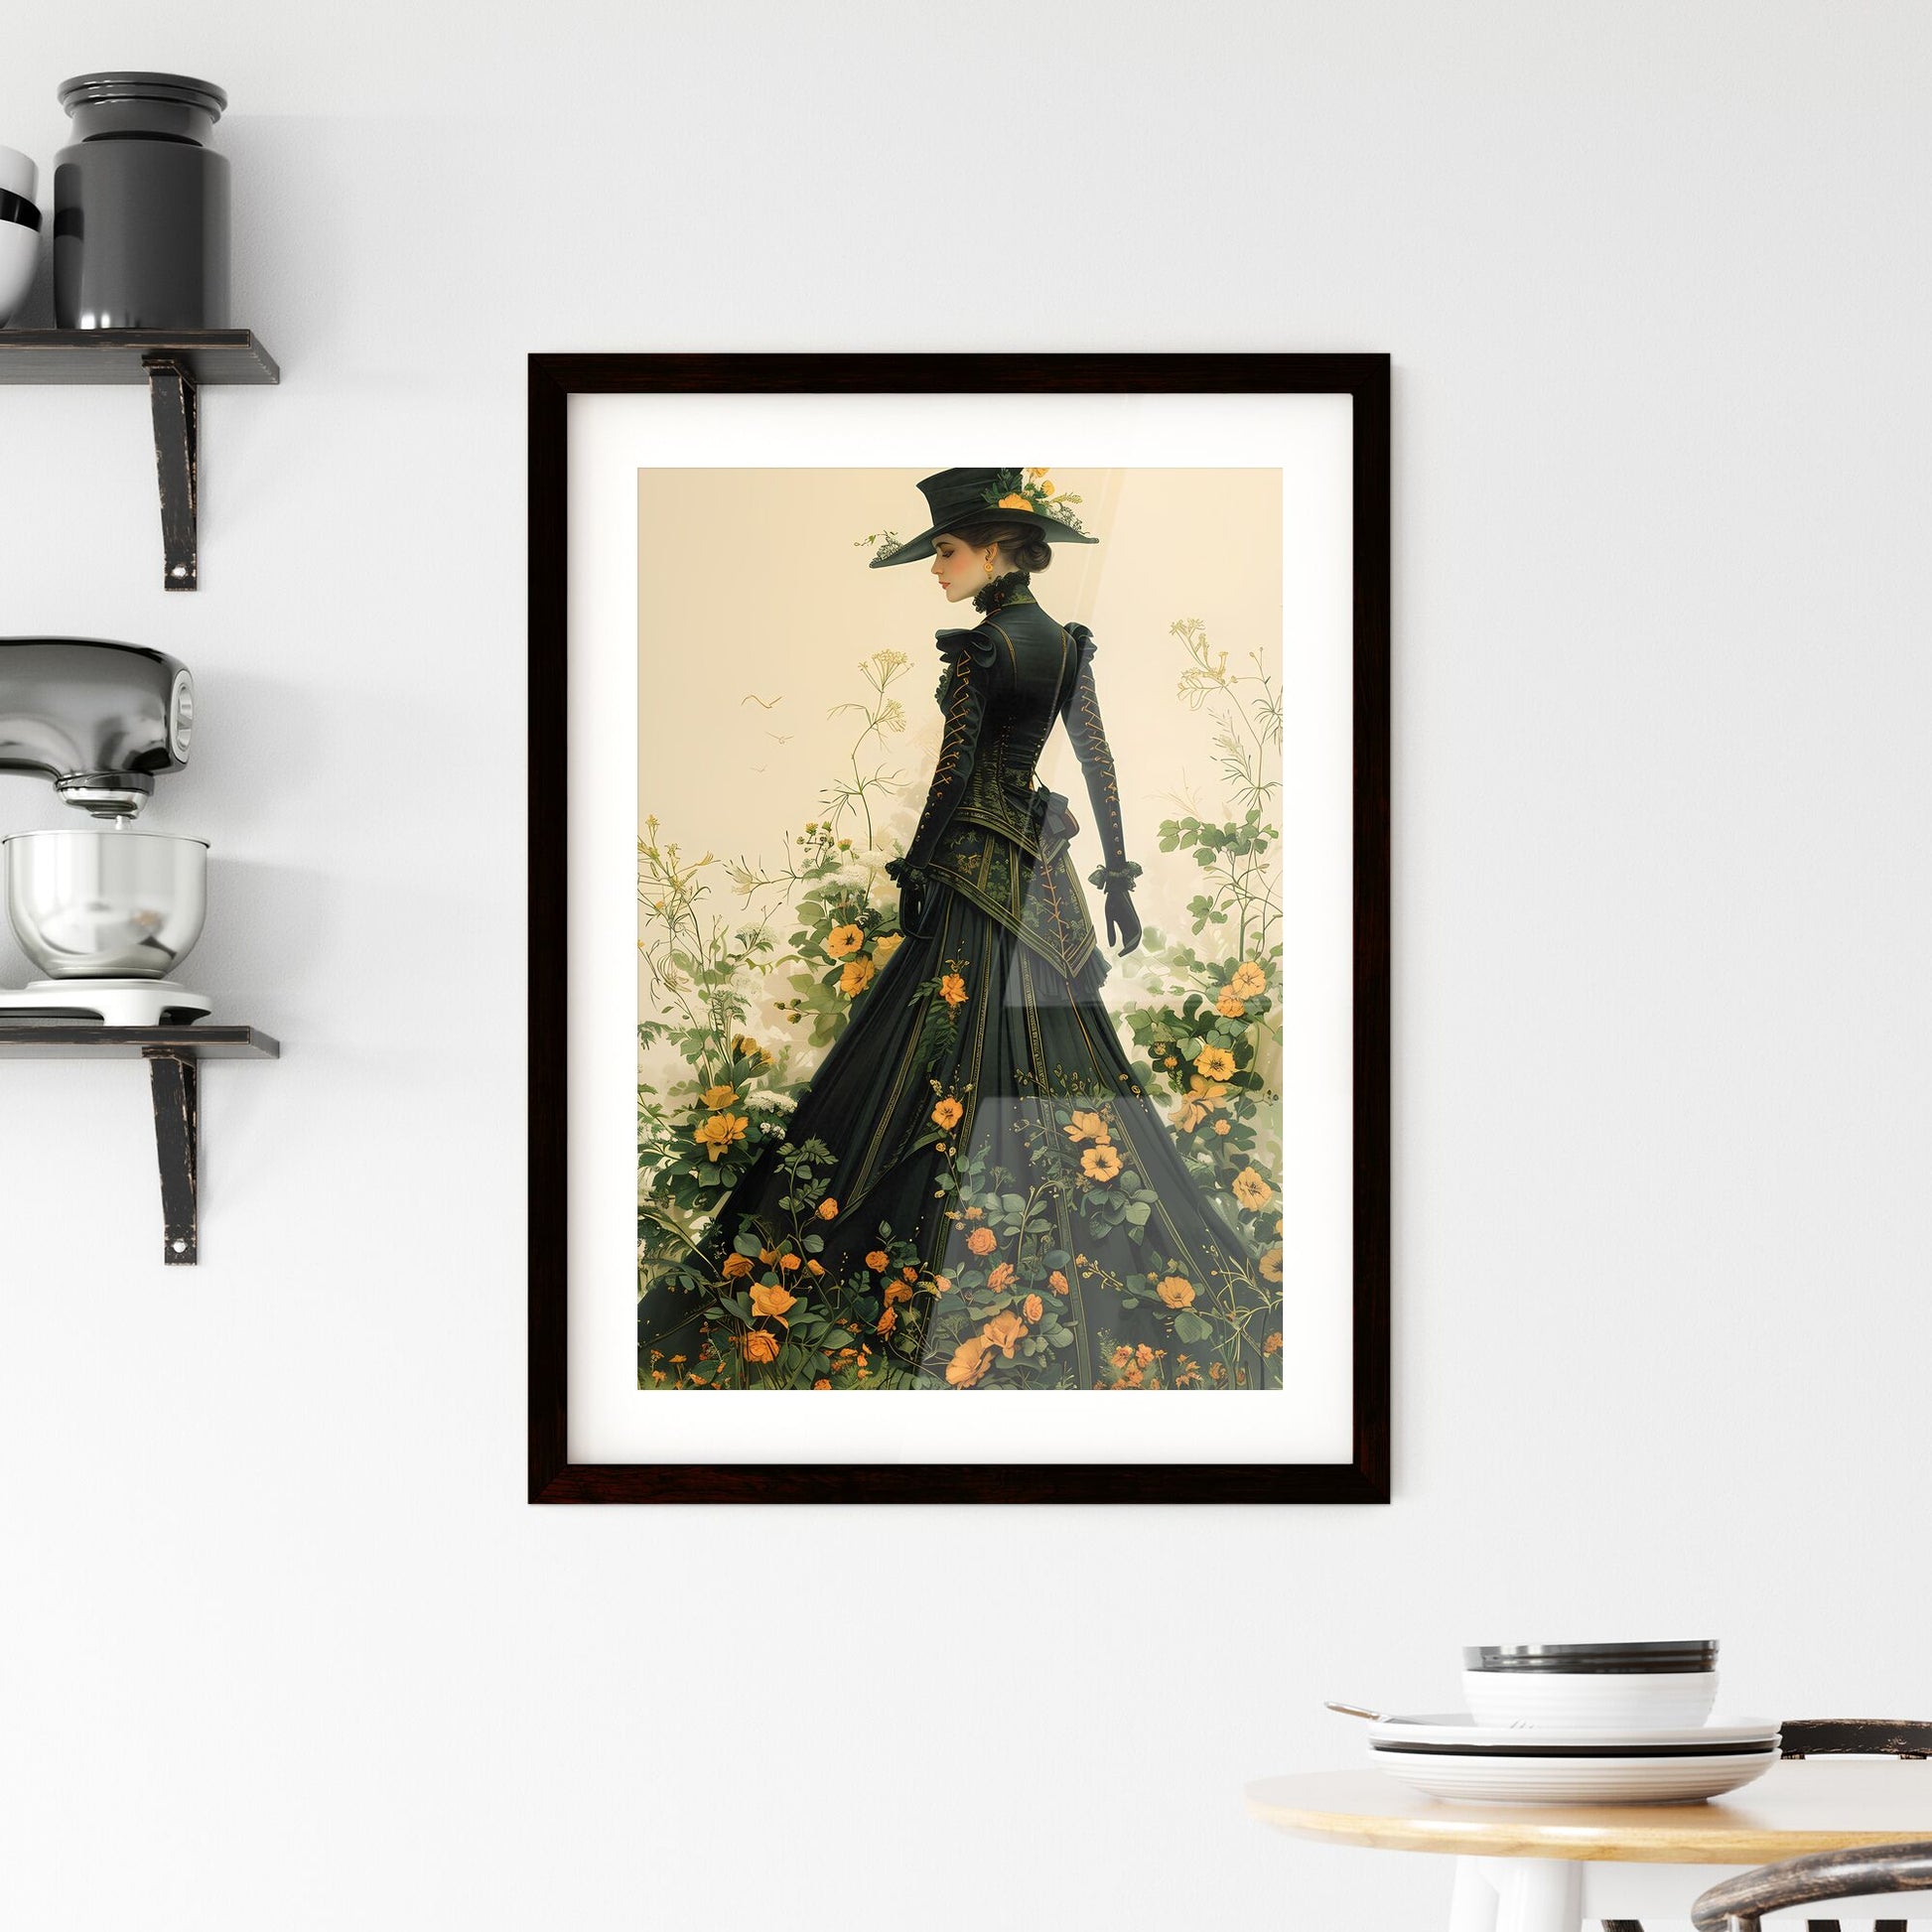 Androgynous Rococo-Inspired Character Concept Art: Vibrant Painting of a Woman in Dress and Hat Default Title